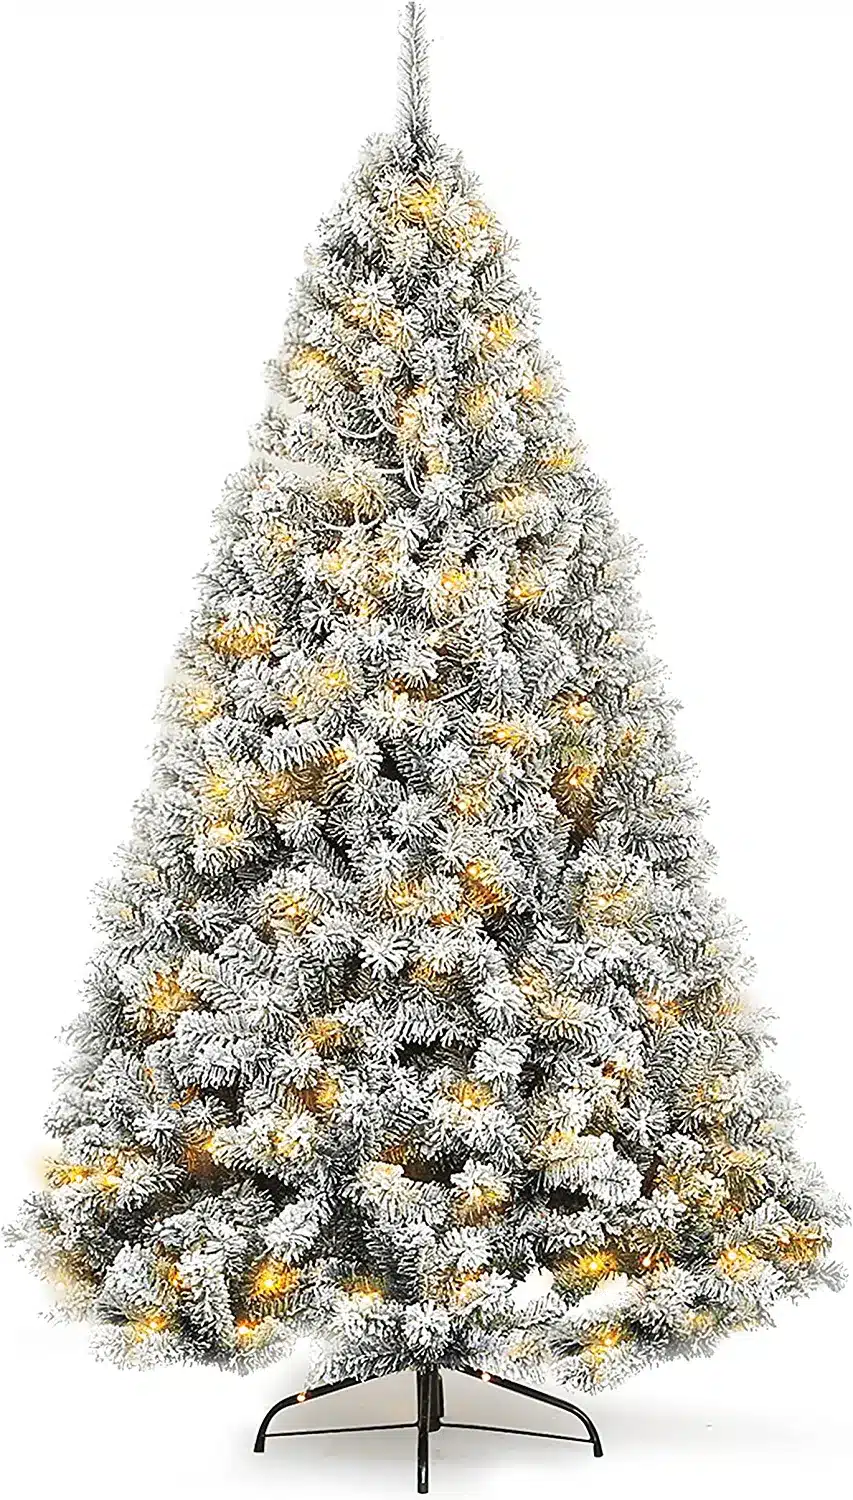 JOIEDOMI 6ft Pre-Lit Artificial Christmas Tree